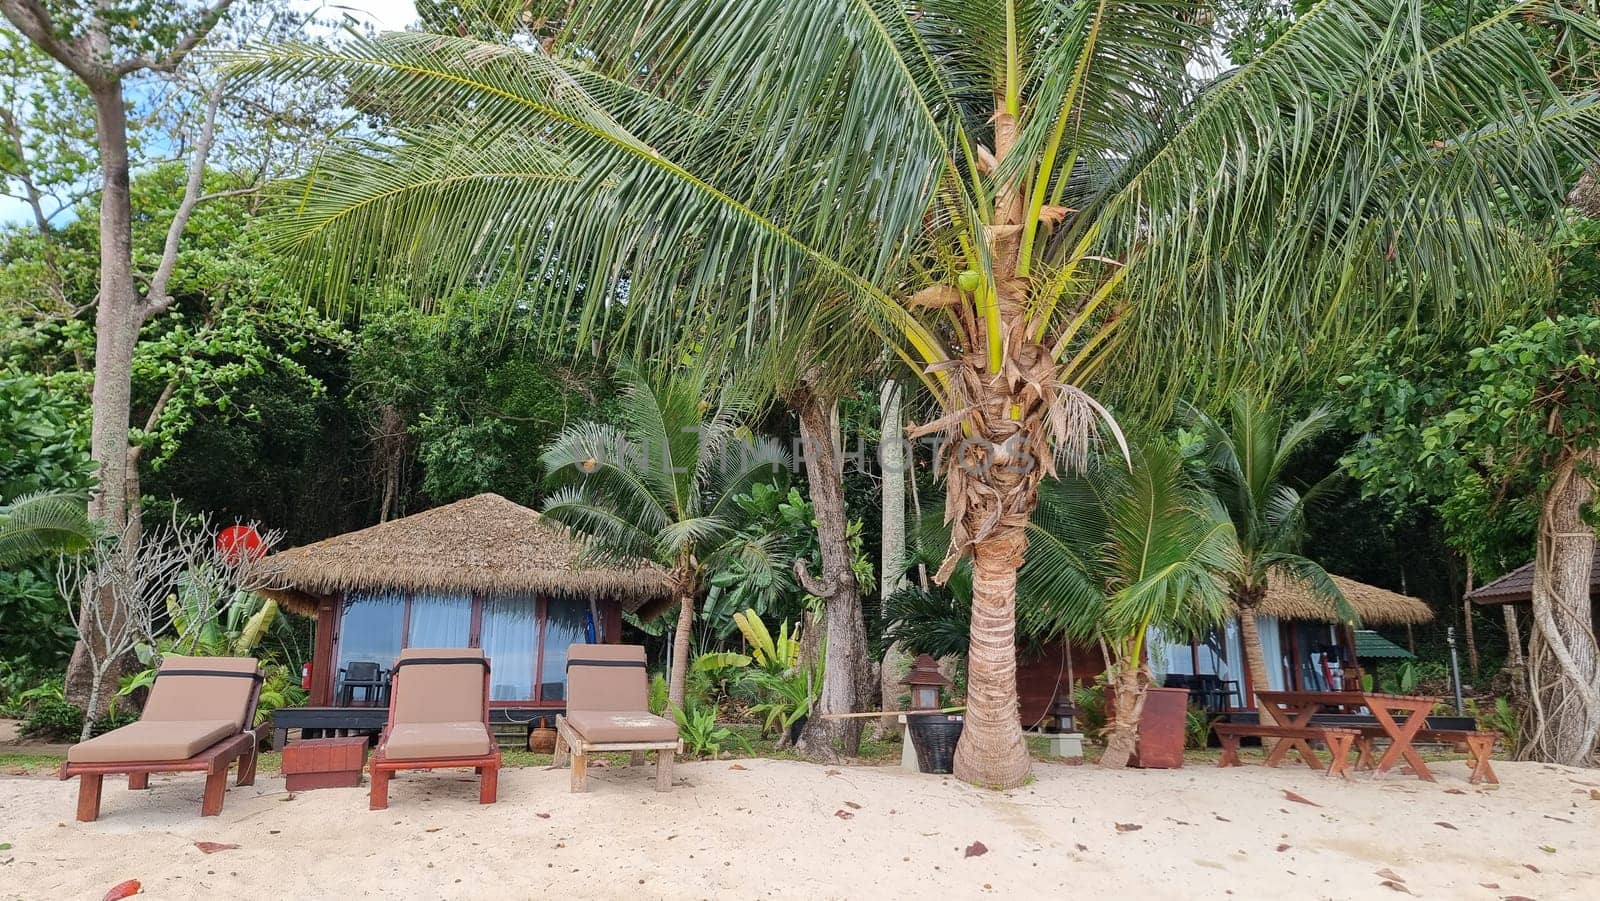 A sandy beach with lounge chairs scattered under swaying palm trees, offering a serene escape for relaxation and enjoying the sun and sound of the ocean waves. Koh Kradan Thailand